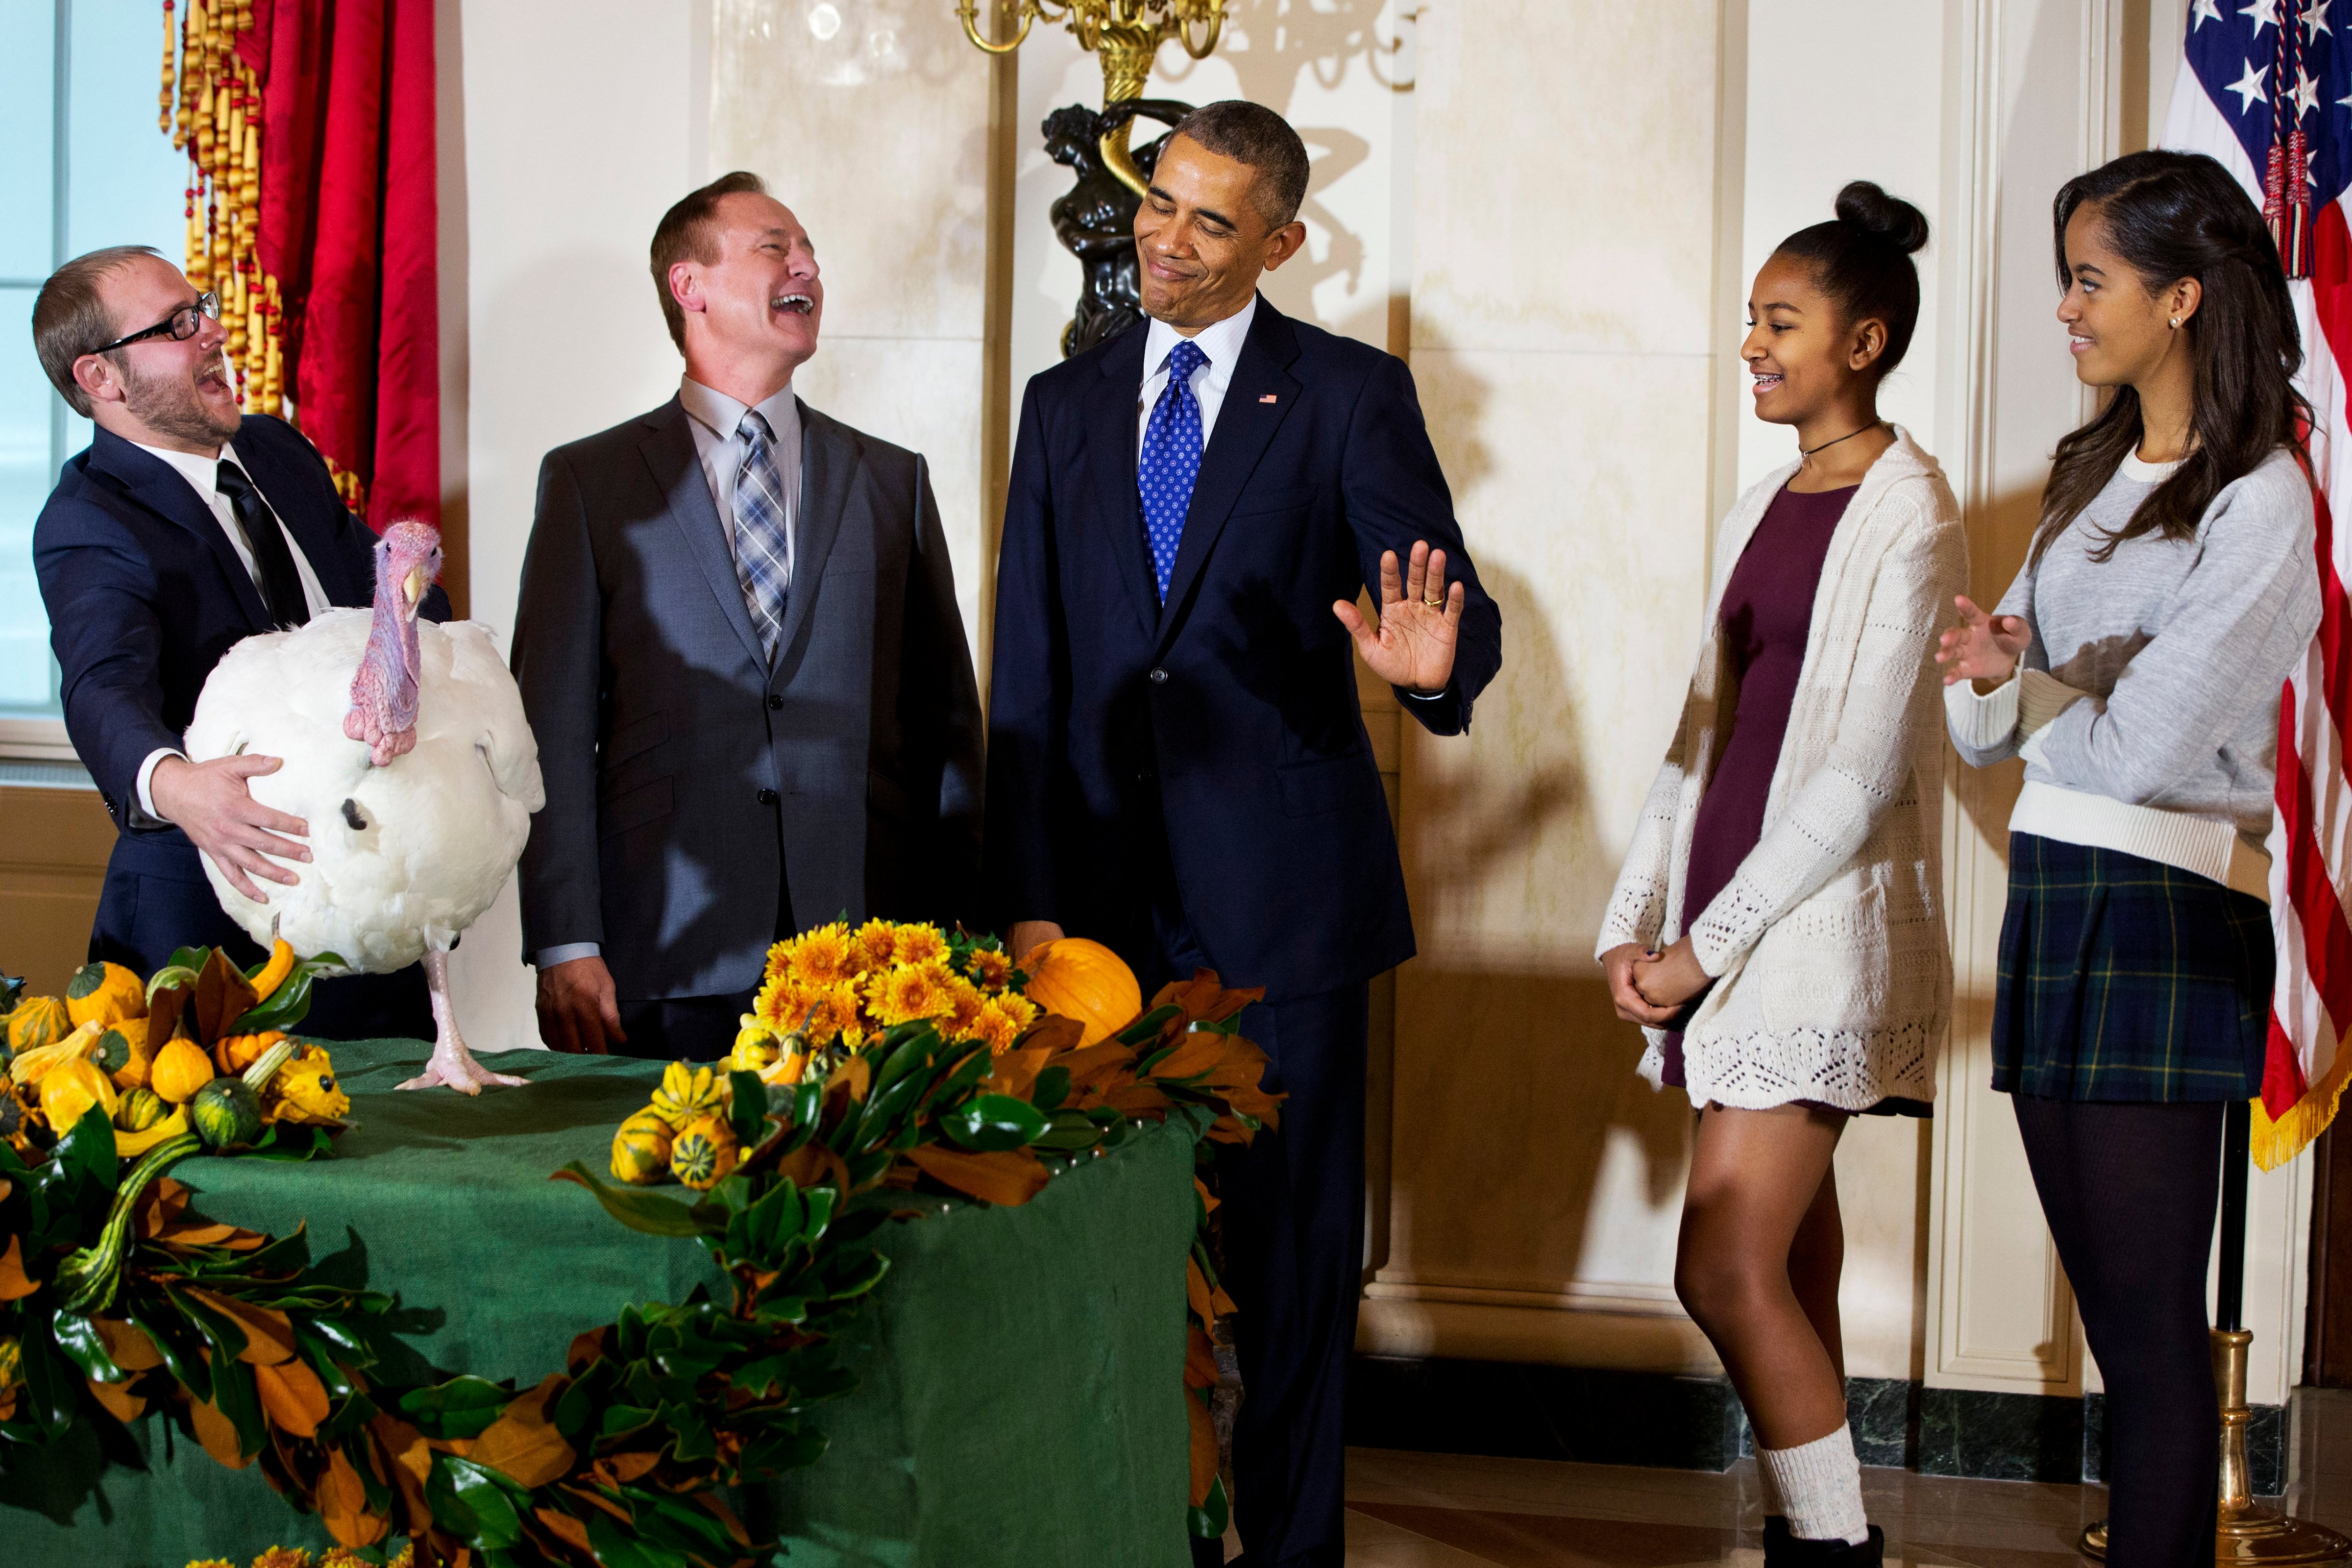 President Barack Obama gestures that his daughters Sasha and Malia would rather pass on touching "Cheese," the turkey during a ceremony at the White House in Washington D.C. on Nov. 26, 2014. (Jacquelyn Martin—AP)